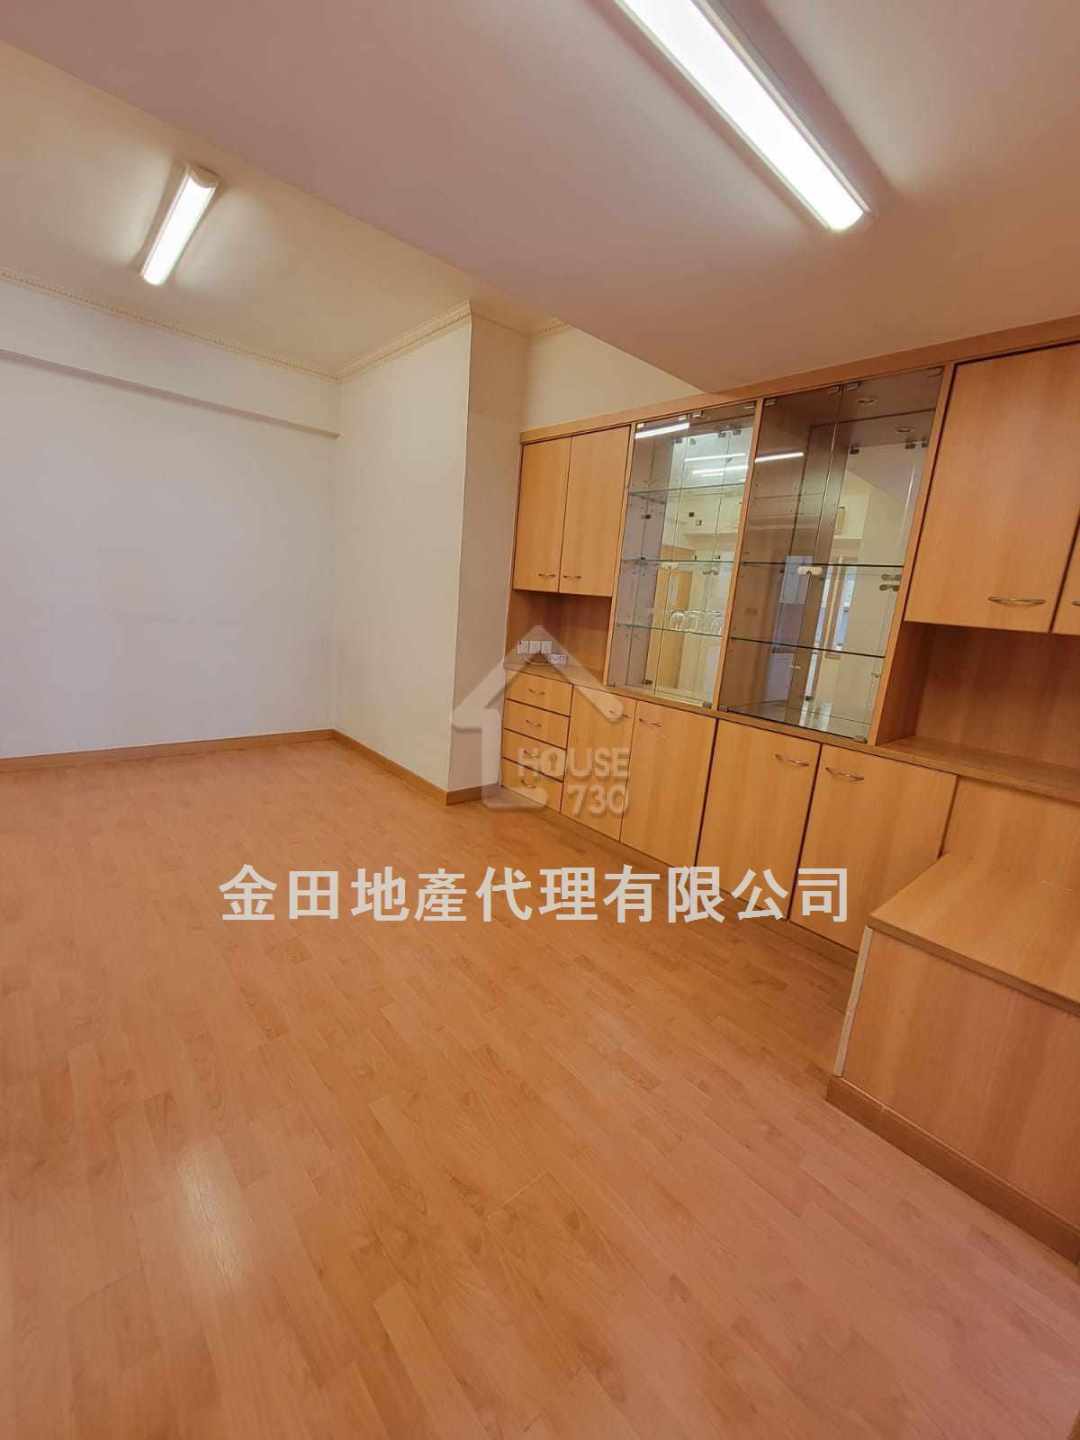 Wan Chai KWONG SANG HONG BUILDING Middle Floor Living Room House730-6282601